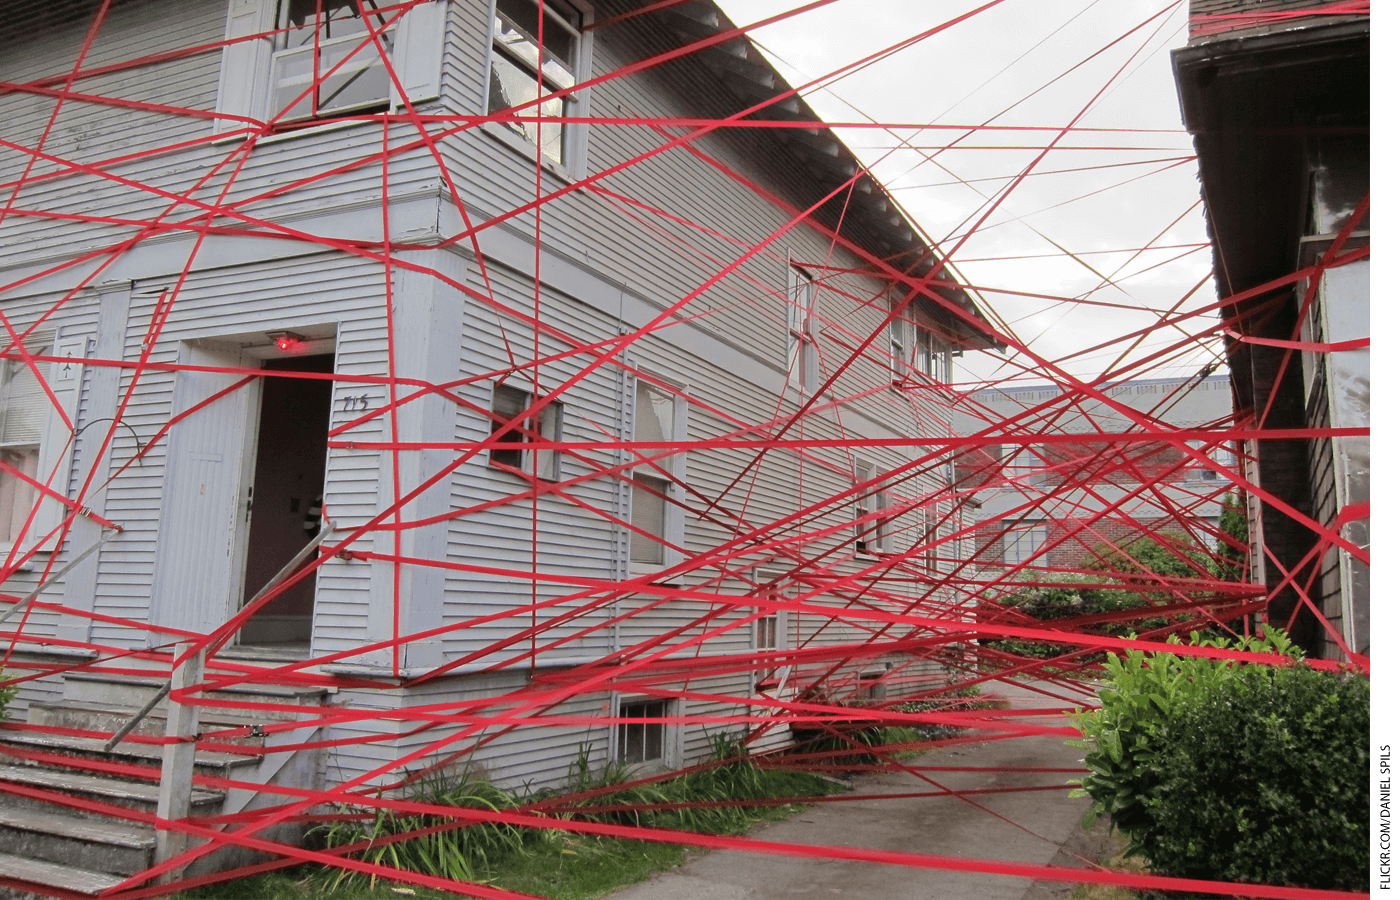 Building covered in red tape